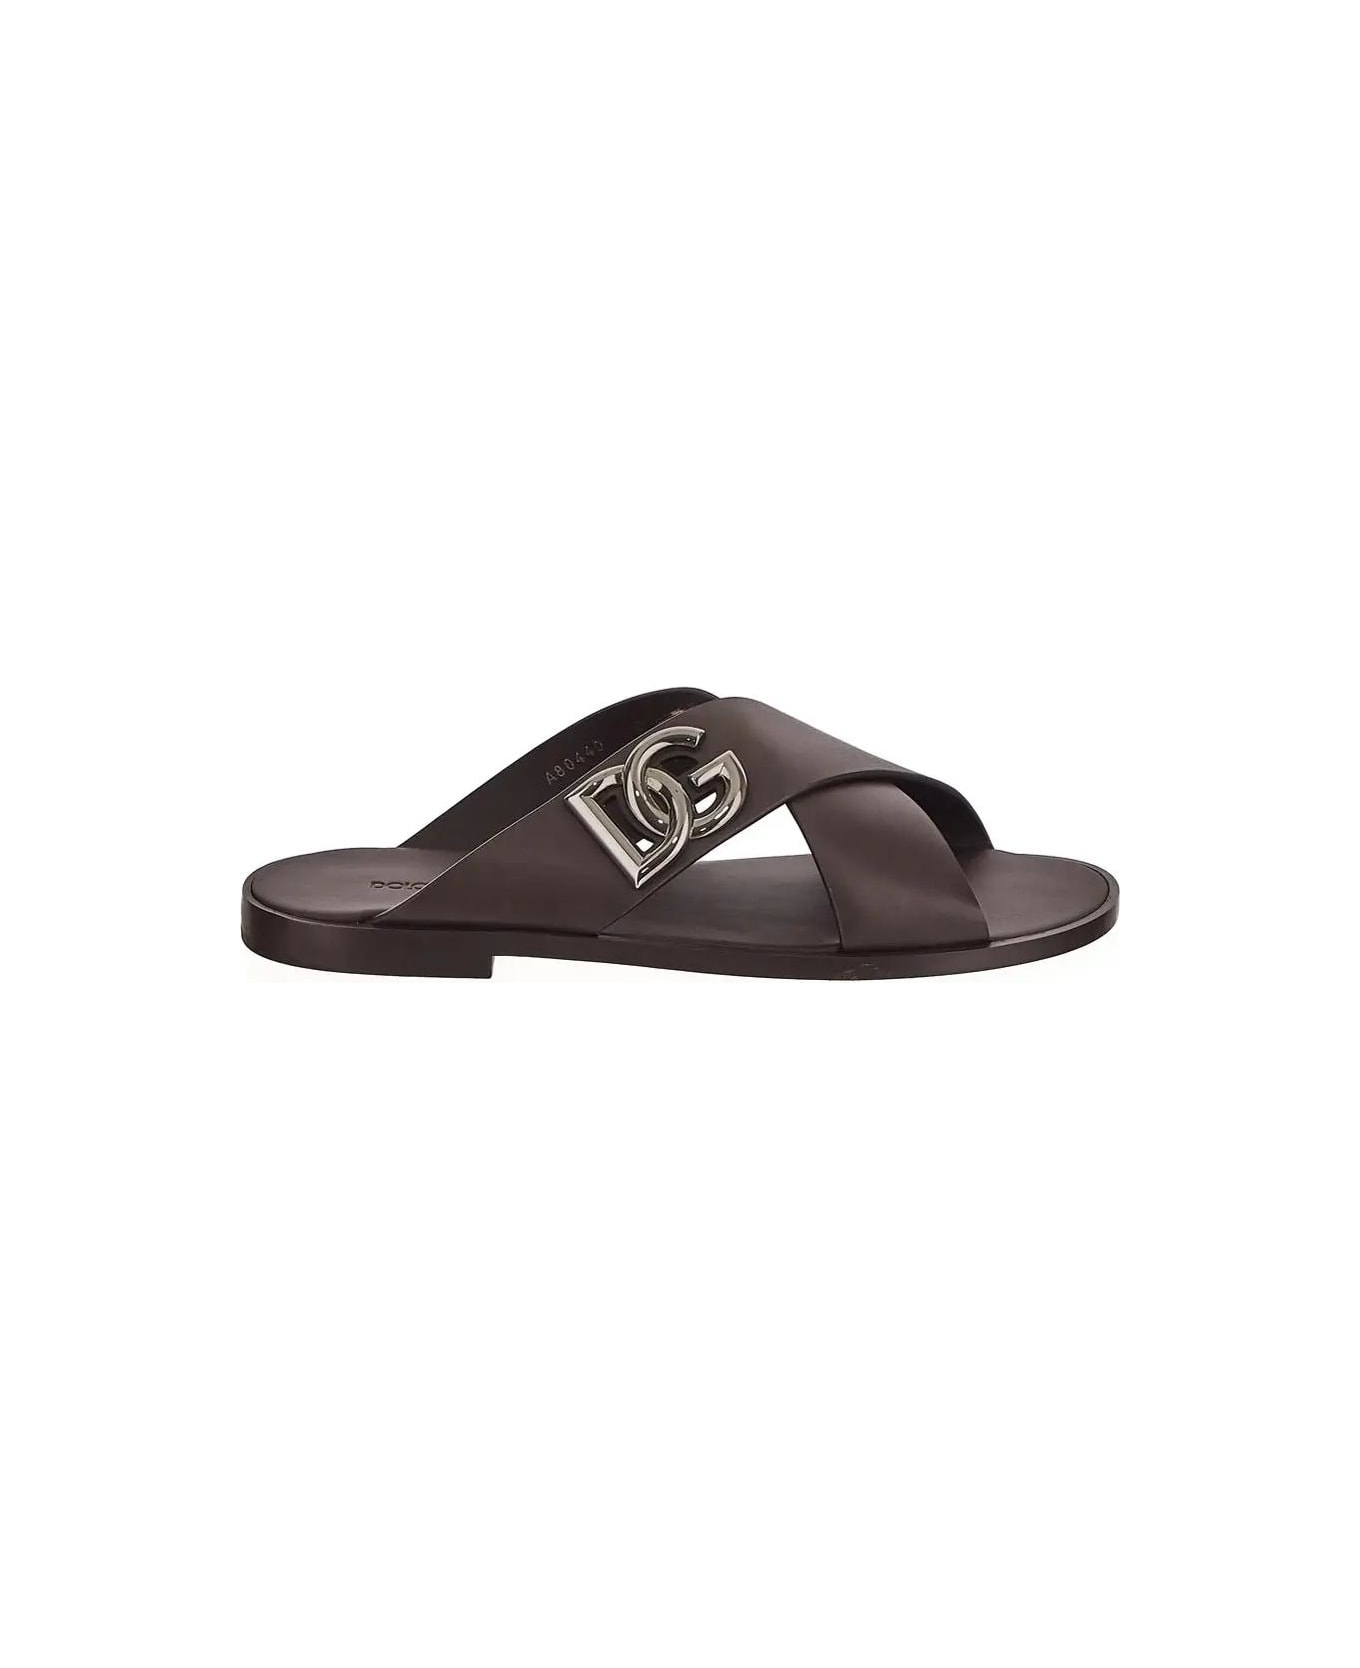 Dolce & Gabbana Leather Sandals - Brown その他各種シューズ